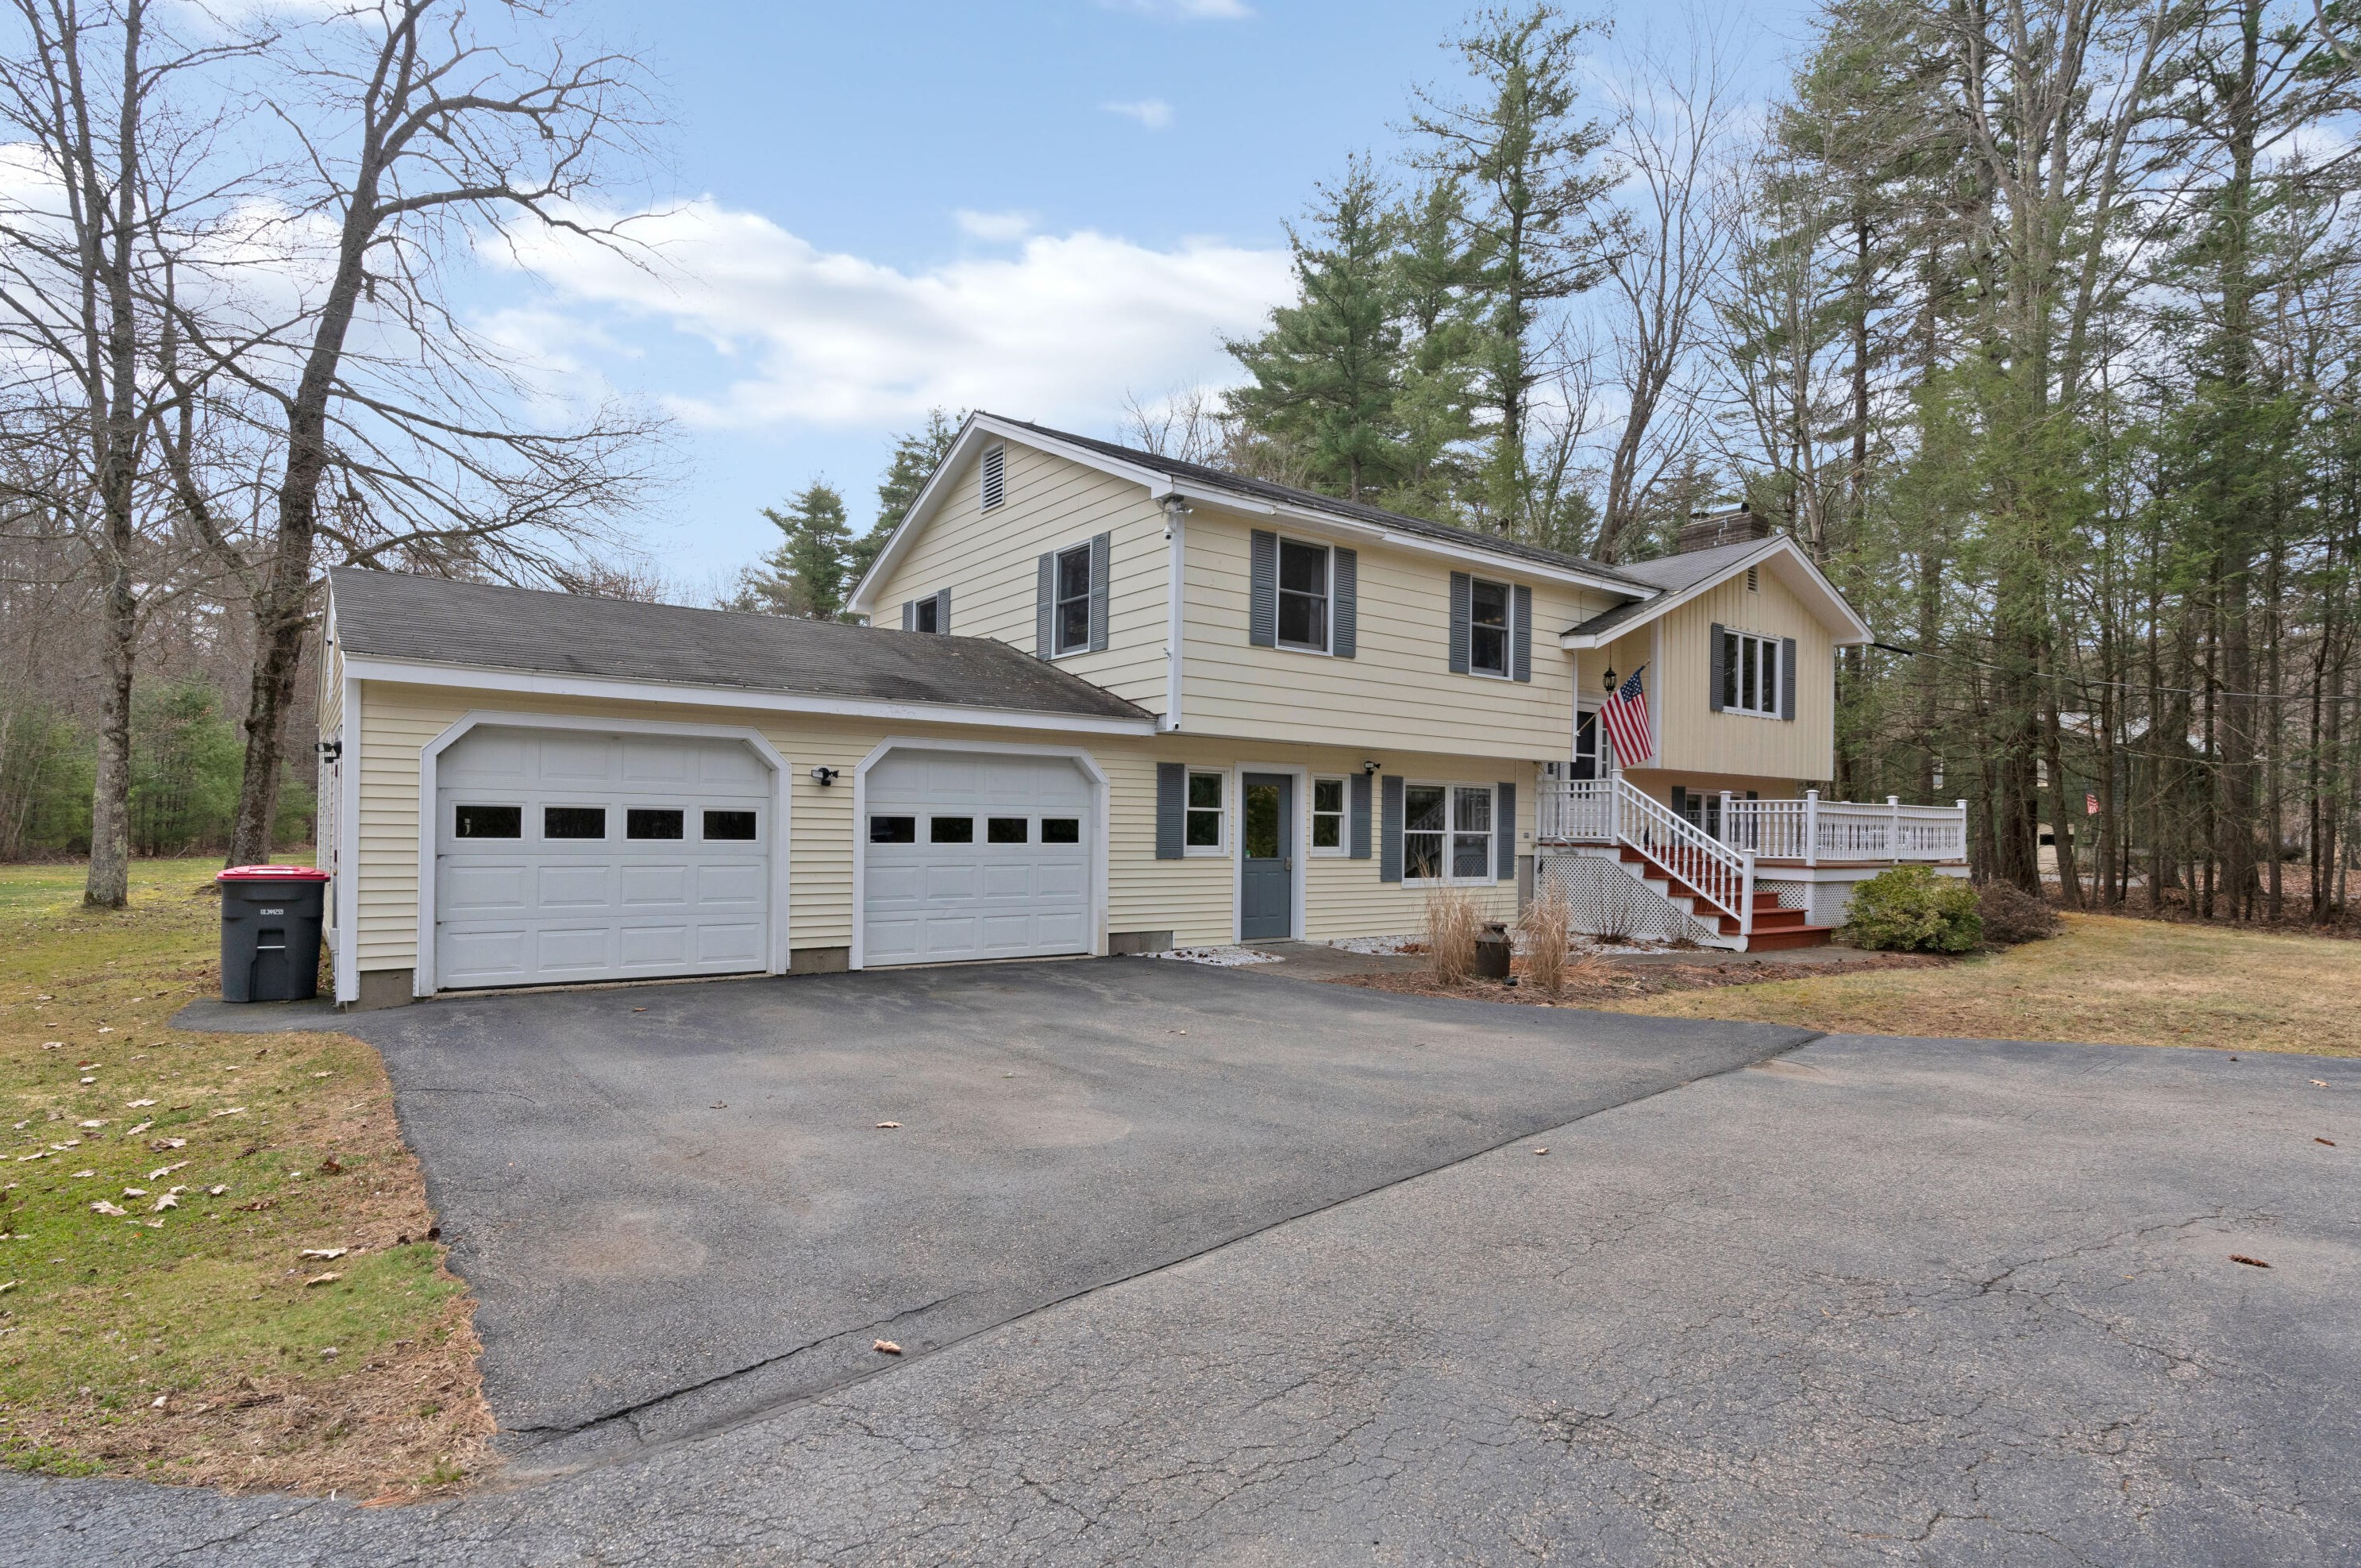 185 Governor Hill Rd, Eliot, ME 03903